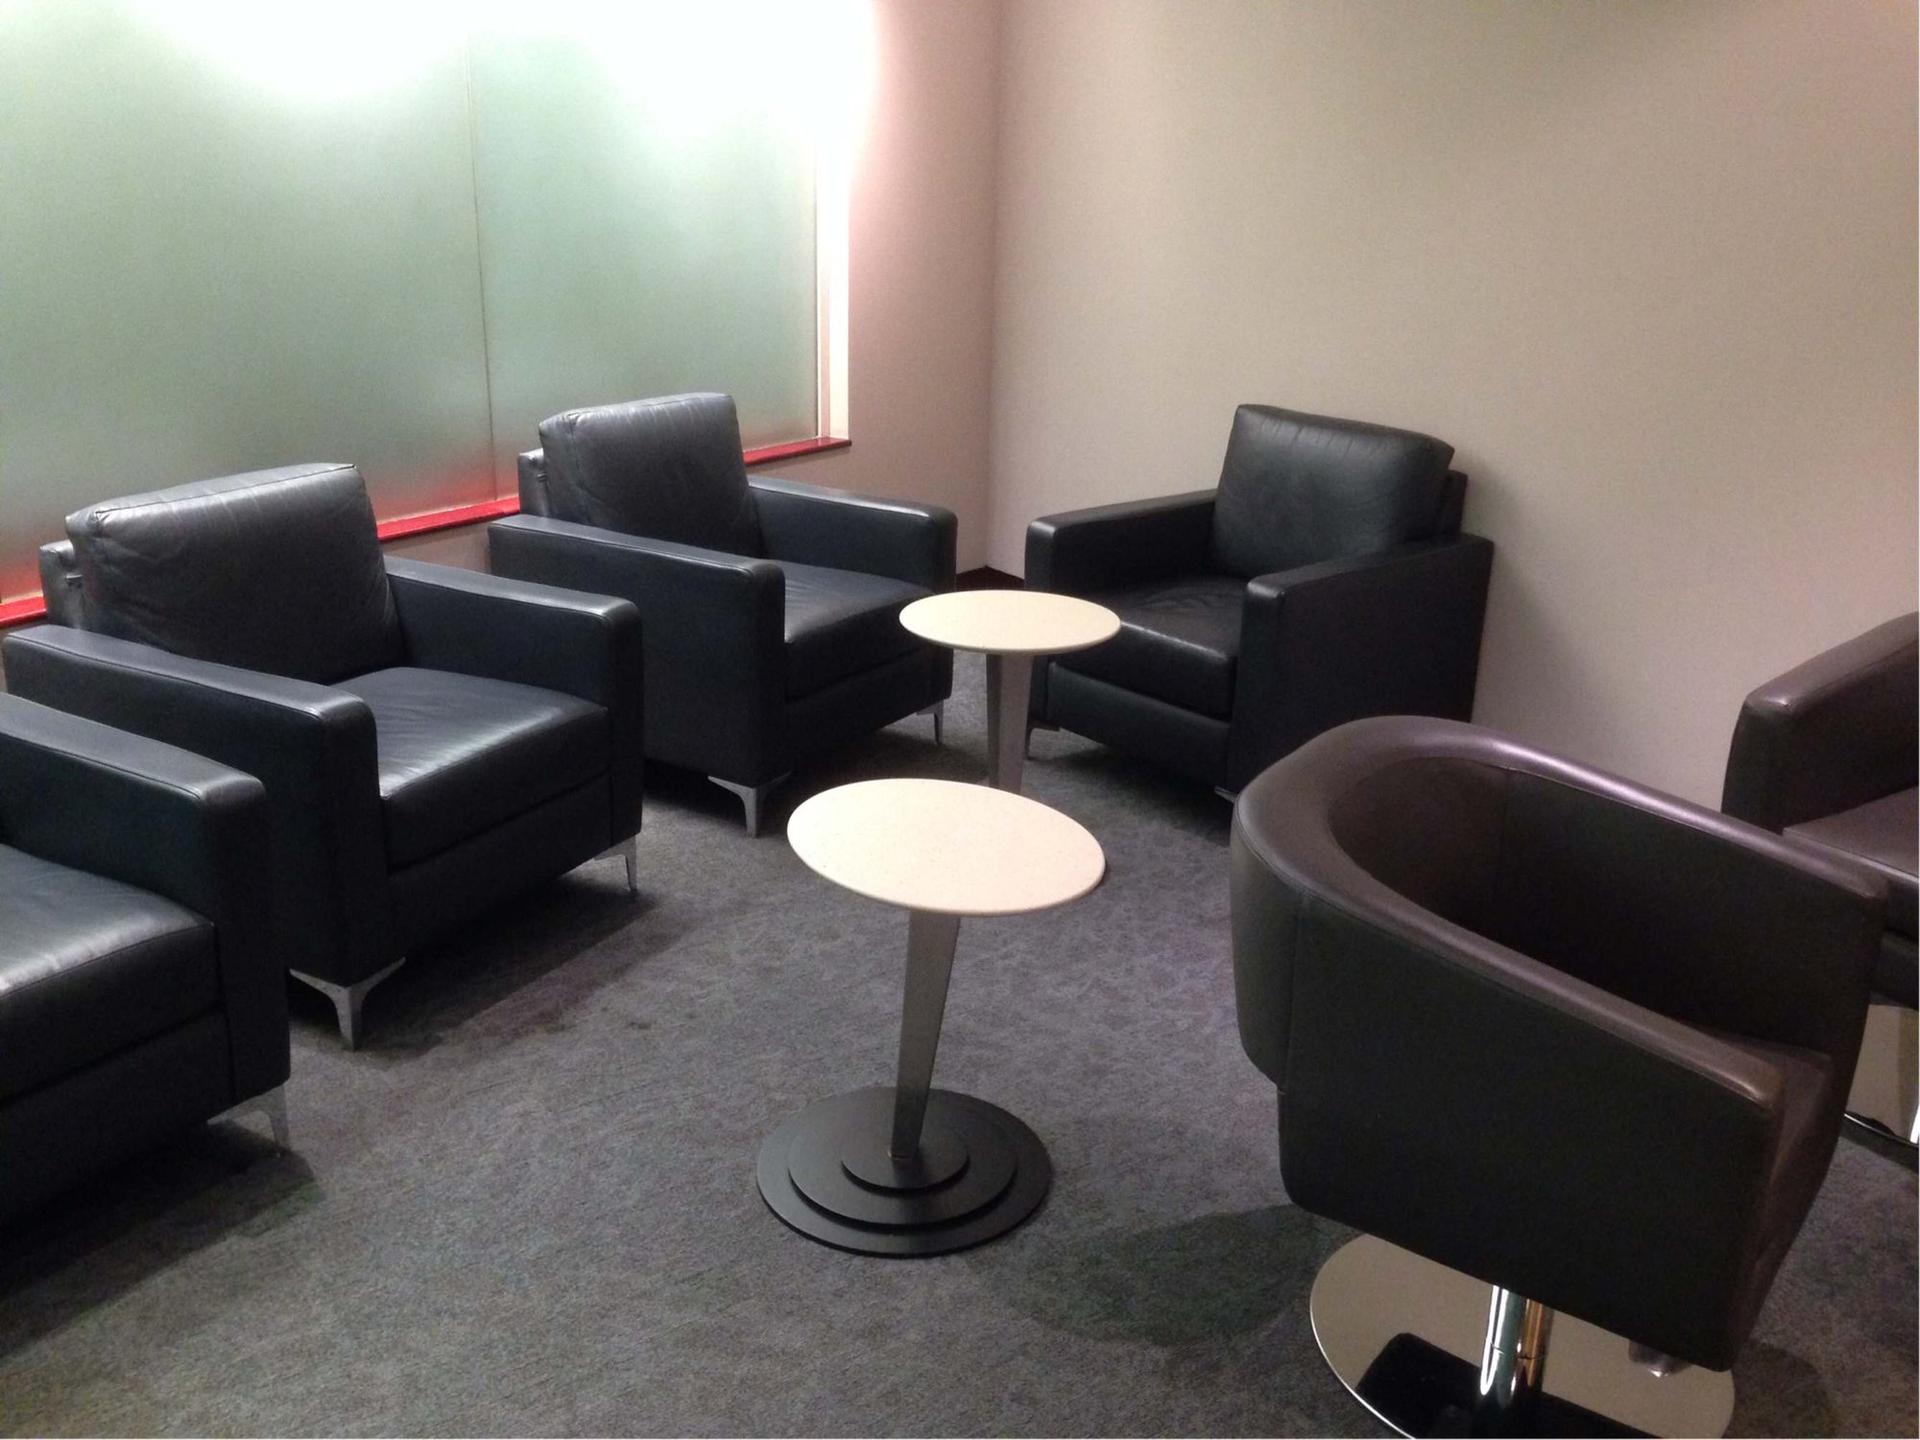 Air Canada Maple Leaf Lounge image 21 of 64